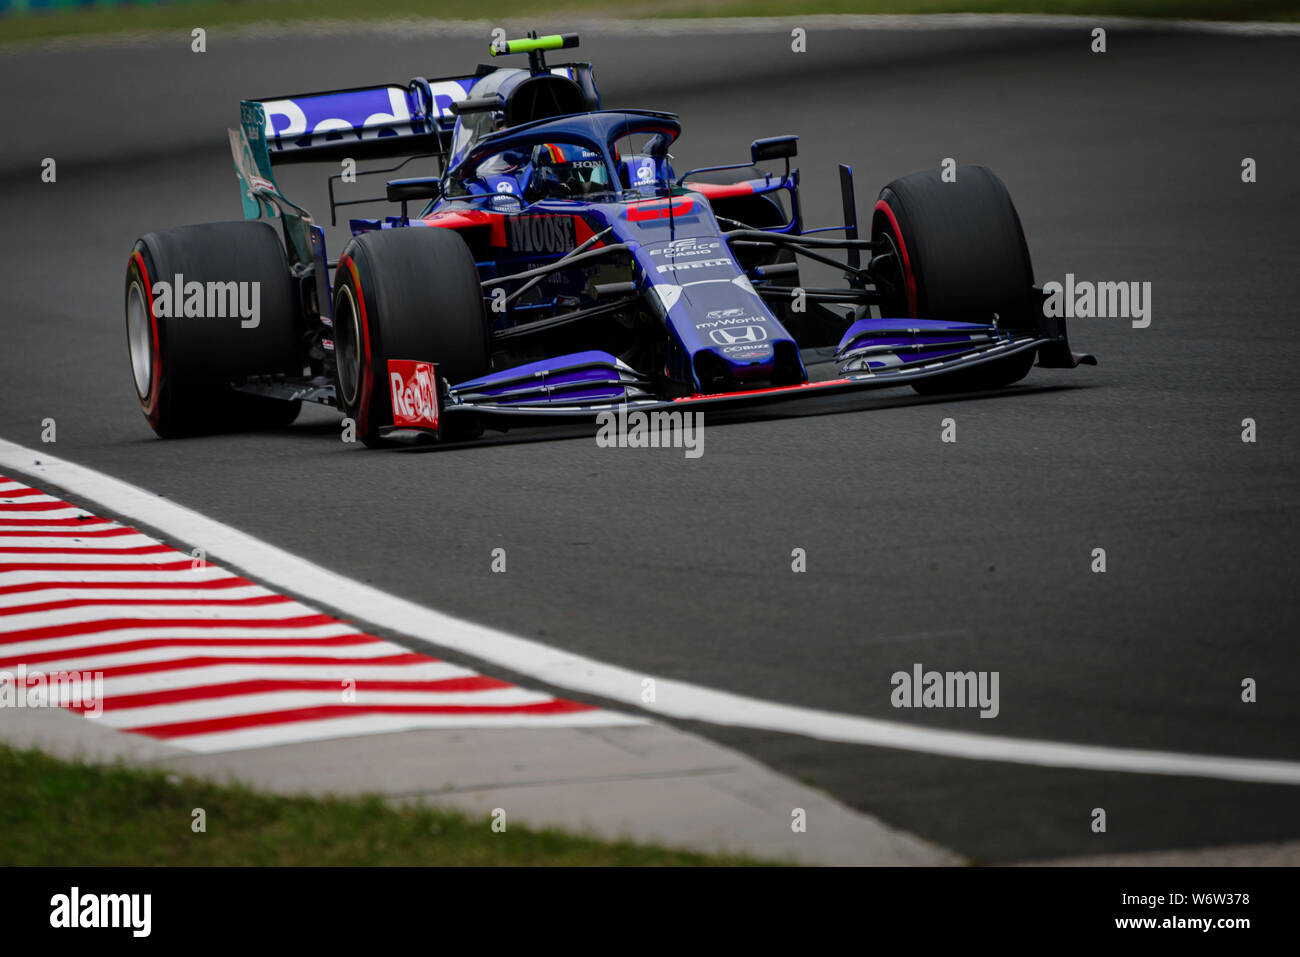 Scuderia Toro Rosso’s Thai driver Alexander Albon competes during the first practice session of the Hungarian F1 Grand Prix. Stock Photo